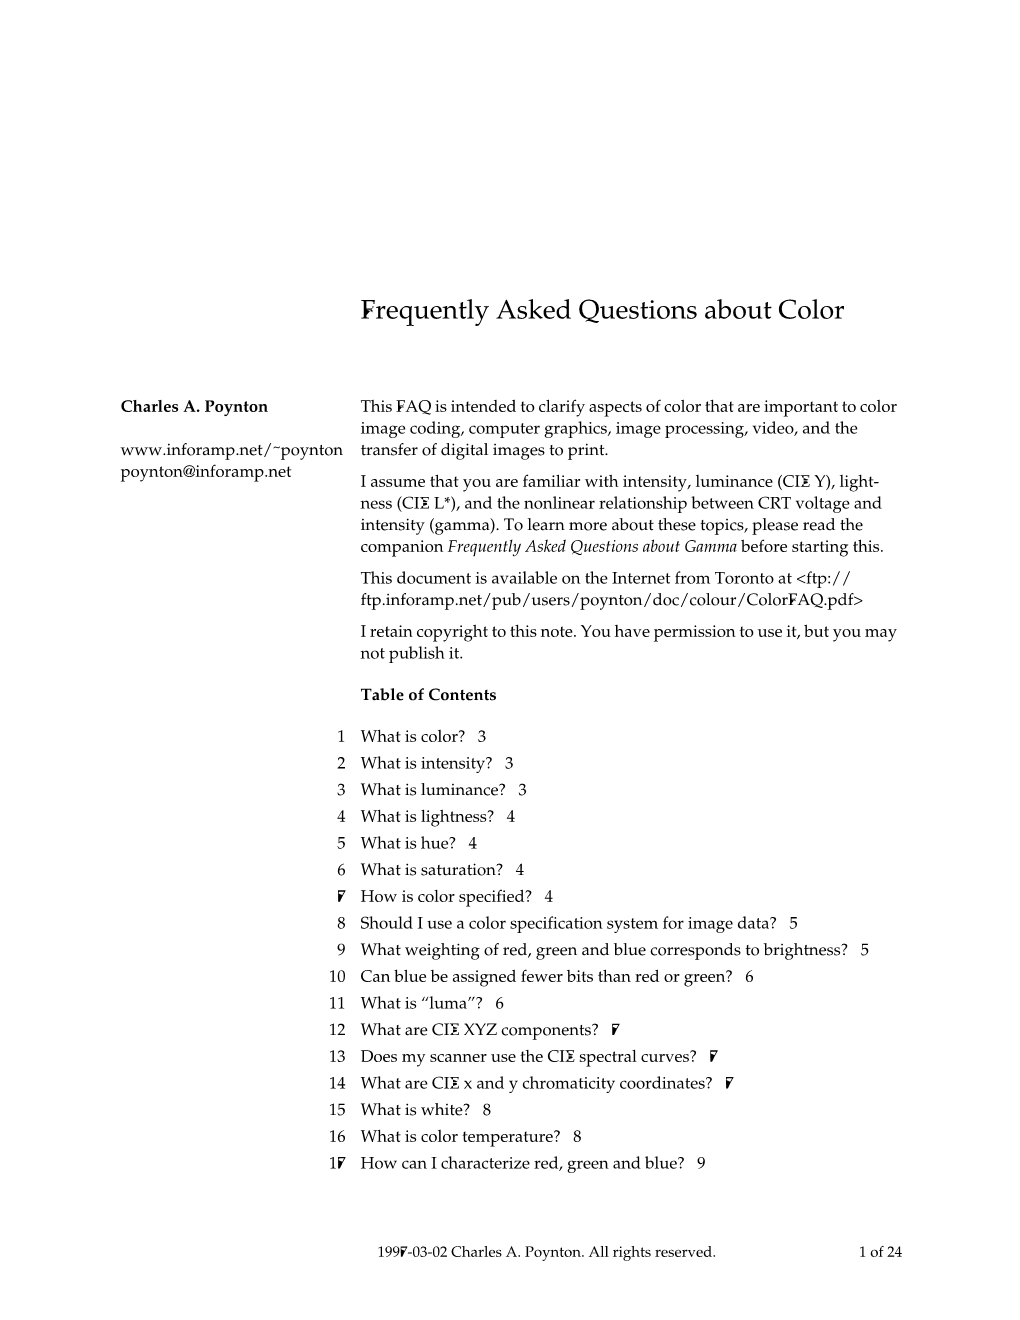 Frequently Asked Questions About Color